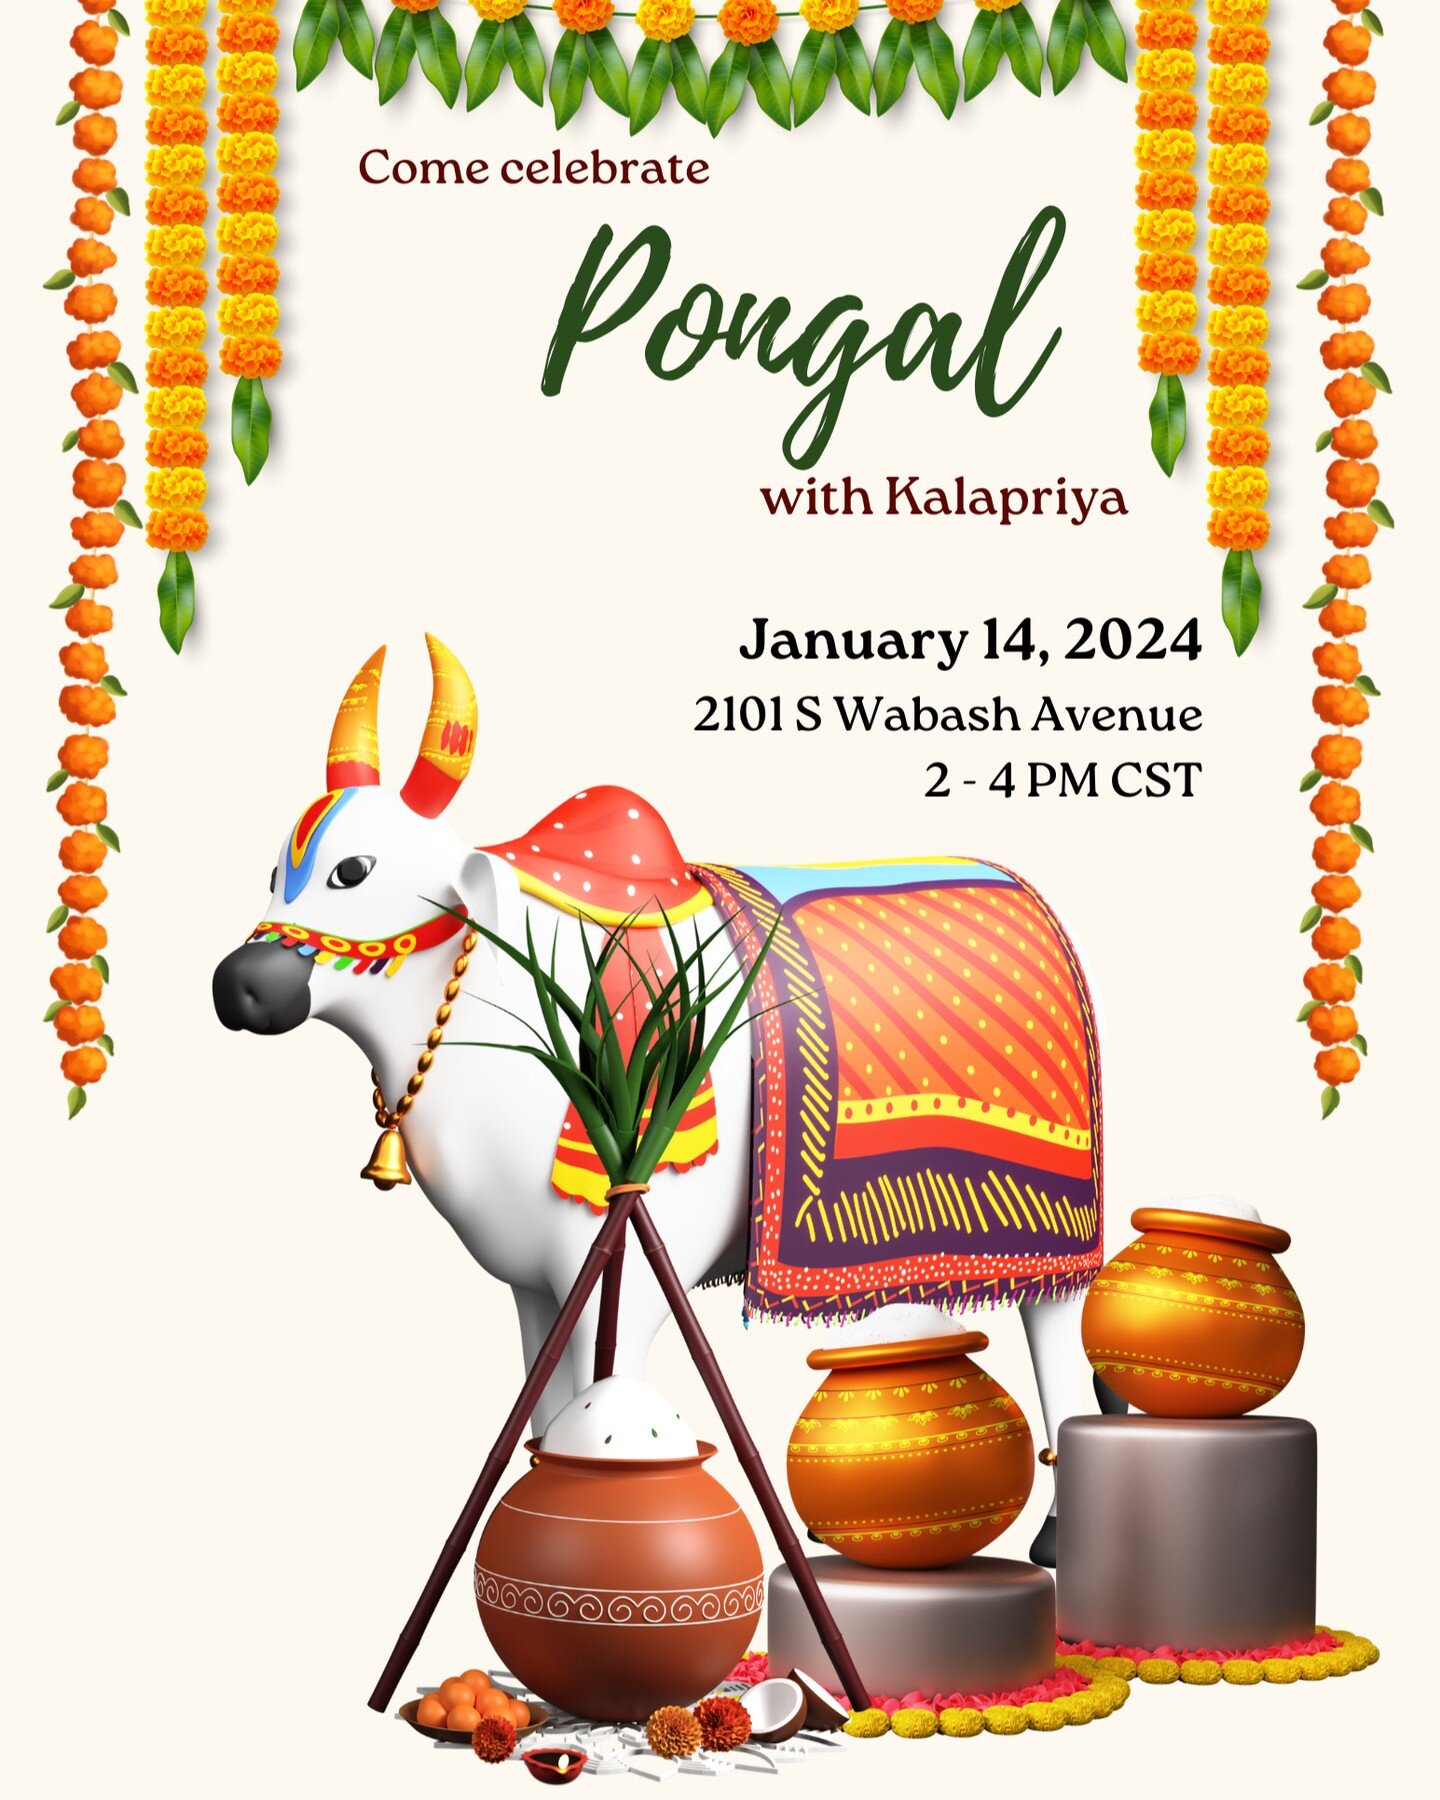 🎆Pongal-ooooo Pongal! 

We would love for you all to join us on the auspicious day of January 14, 2024 to celebrate Thai Pongal with us at Kalapriya! 

All are welcome! If you've never celebrated this festival, we would be honored to share the joy o